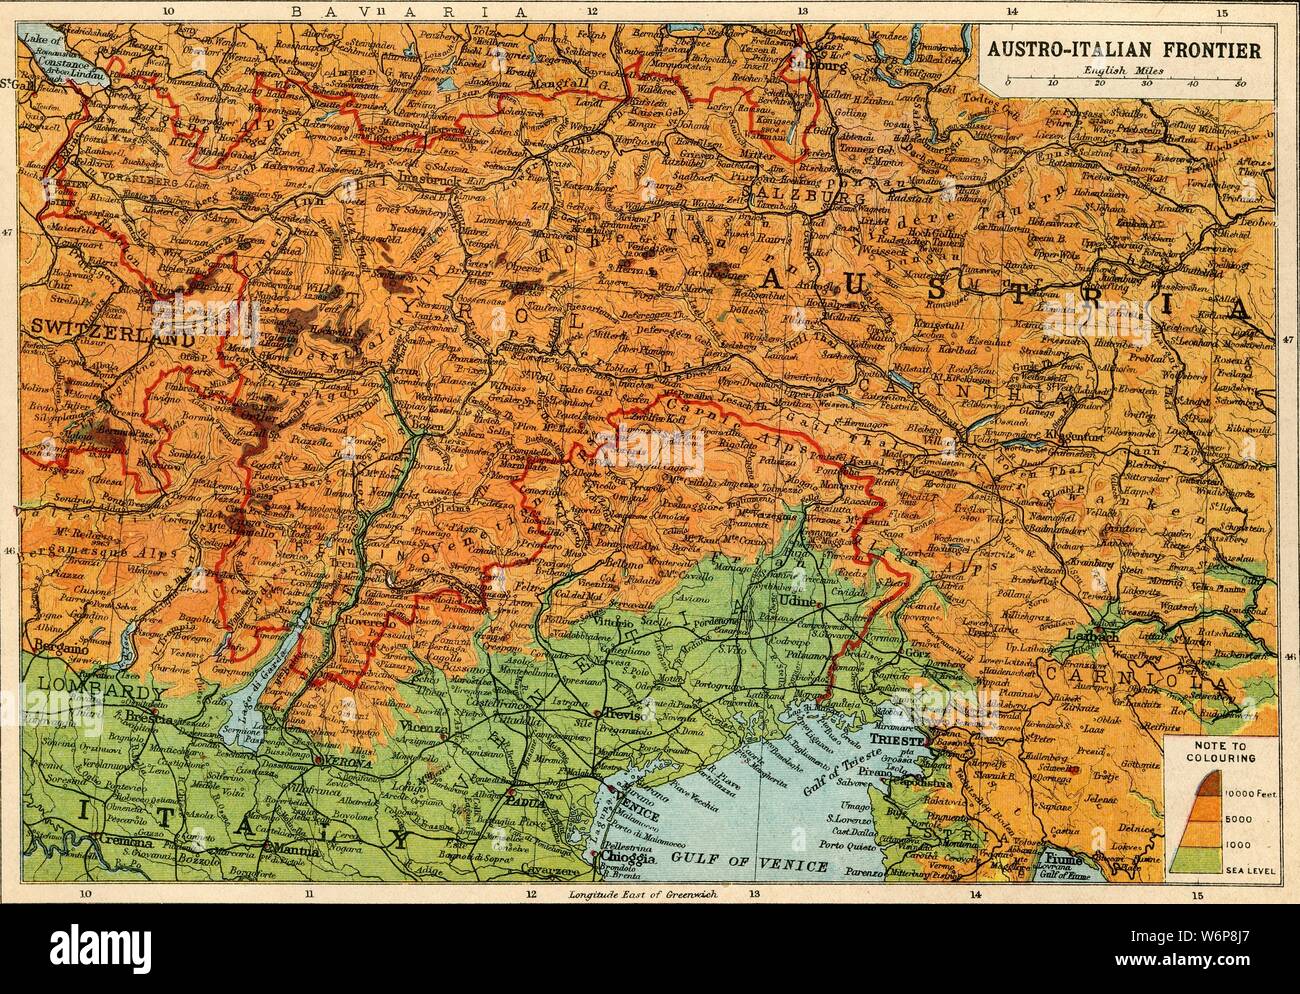 Map of the Austro-Italian frontier, First World War, (c1920). Mountainous area between Salzburg, Trieste and Cremona, showing the Tyrol. From &quot;The Great World War - A History&quot; Volume III, edited by Frank A Mumby. [The Gresham Publishing Company Ltd, London, c1920] Stock Photo